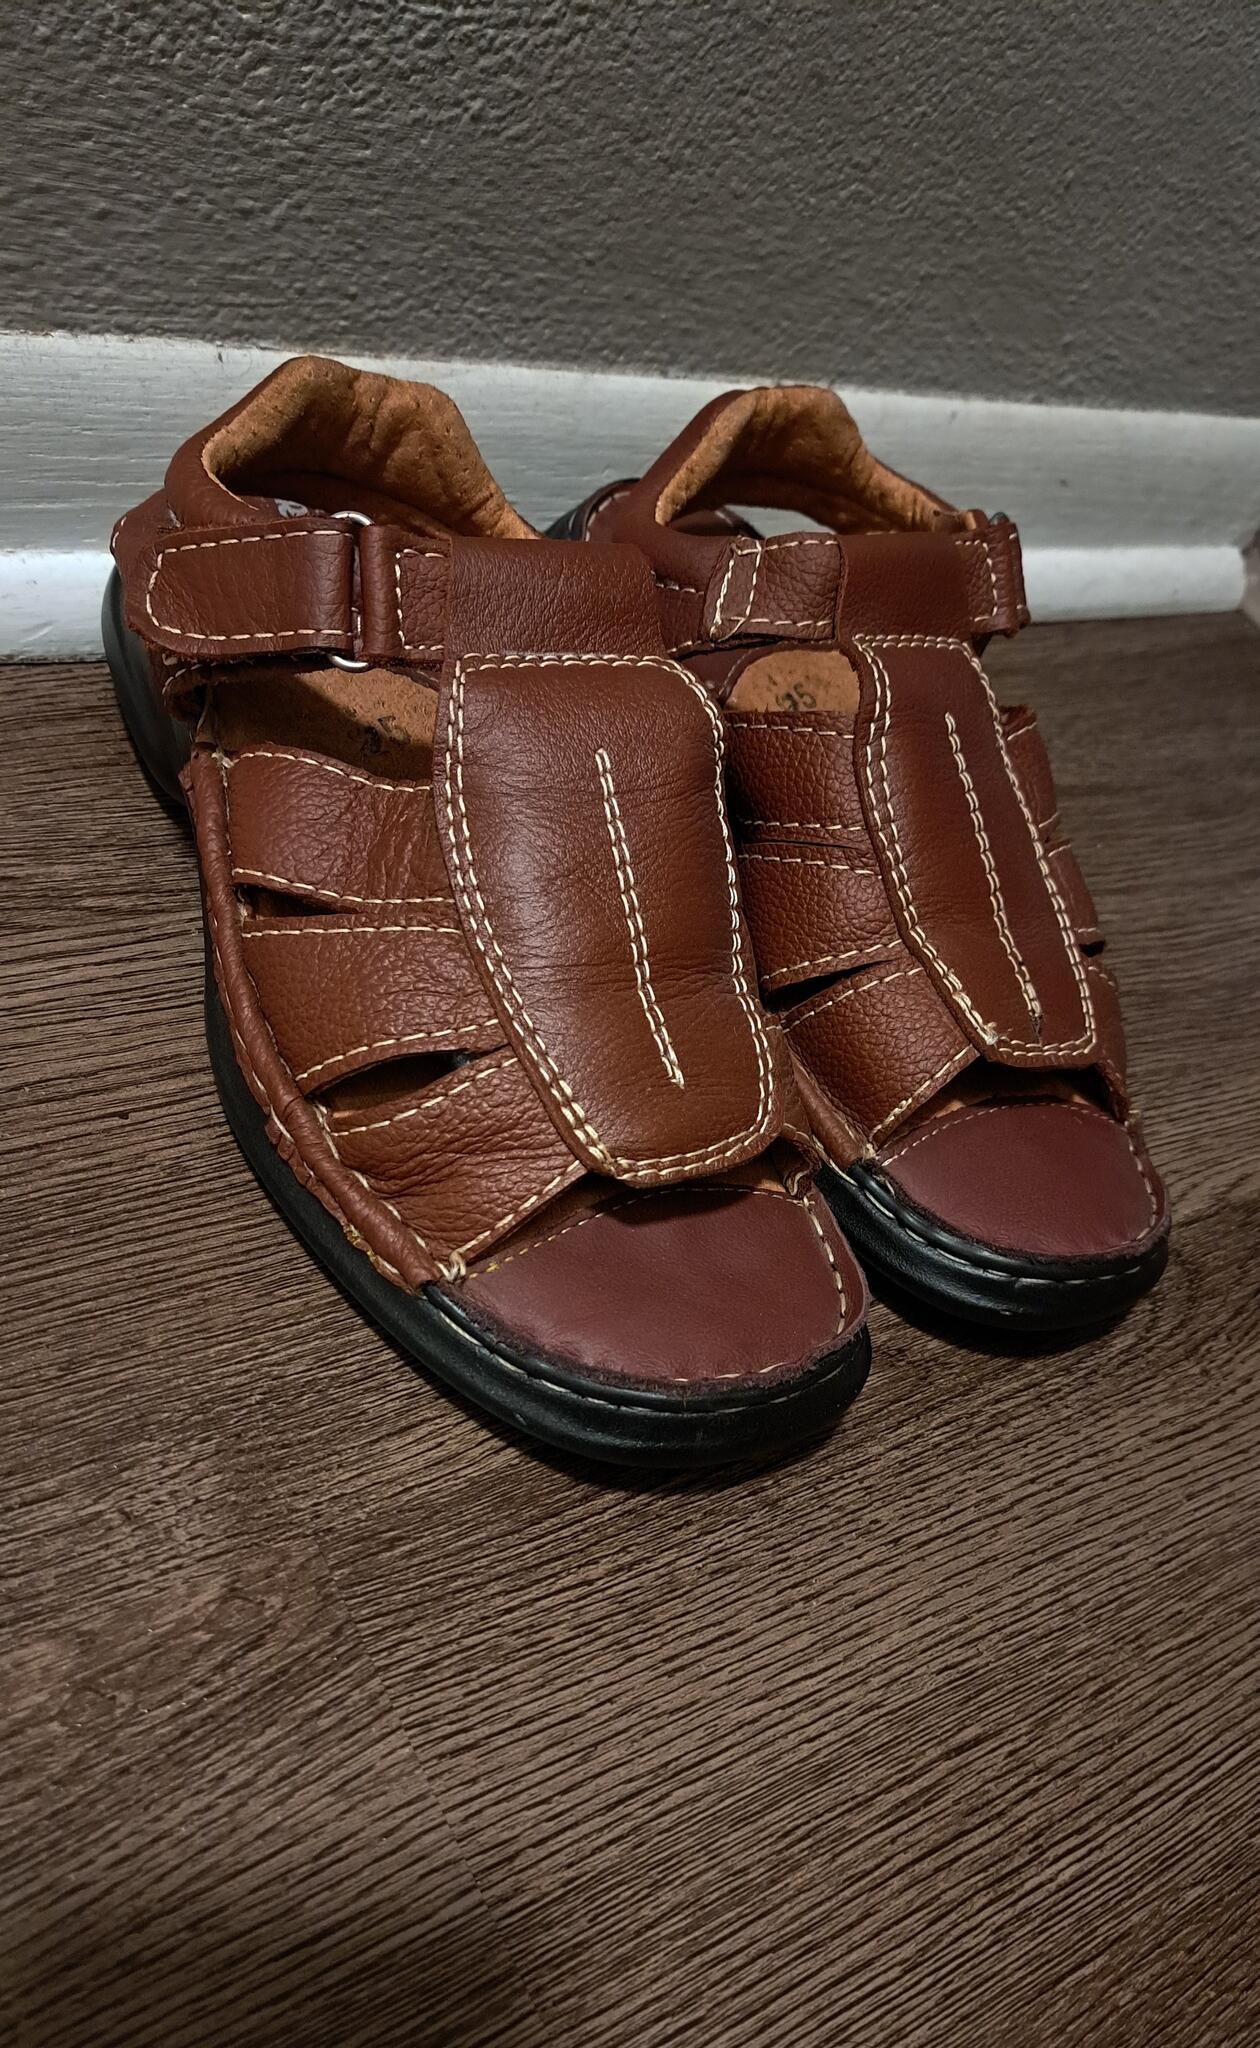 Wide Lether Sandals for $20 in New Brighton, MN | For Sale & Free ...